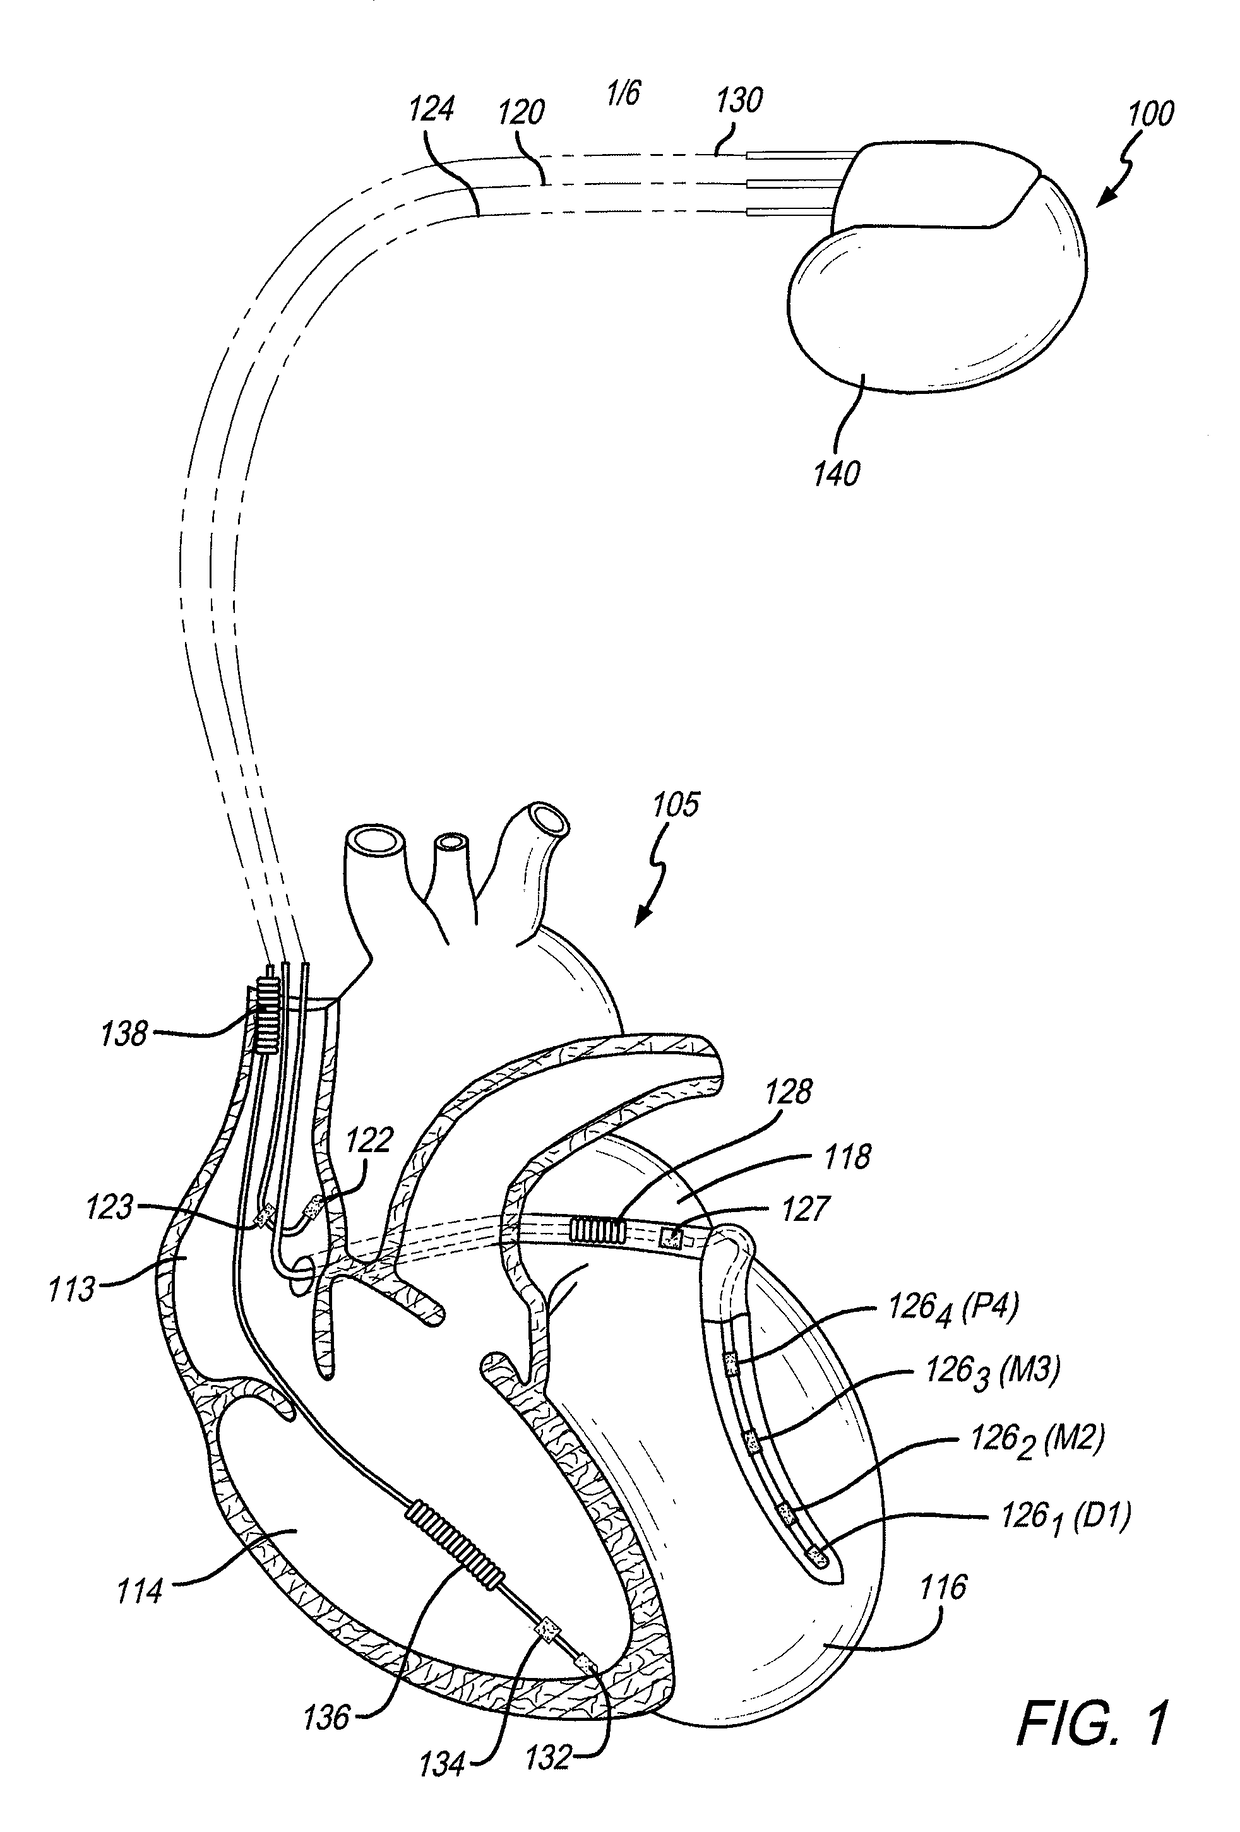 Method and System for Adaptive Bi-Ventricular Fusion Pacing